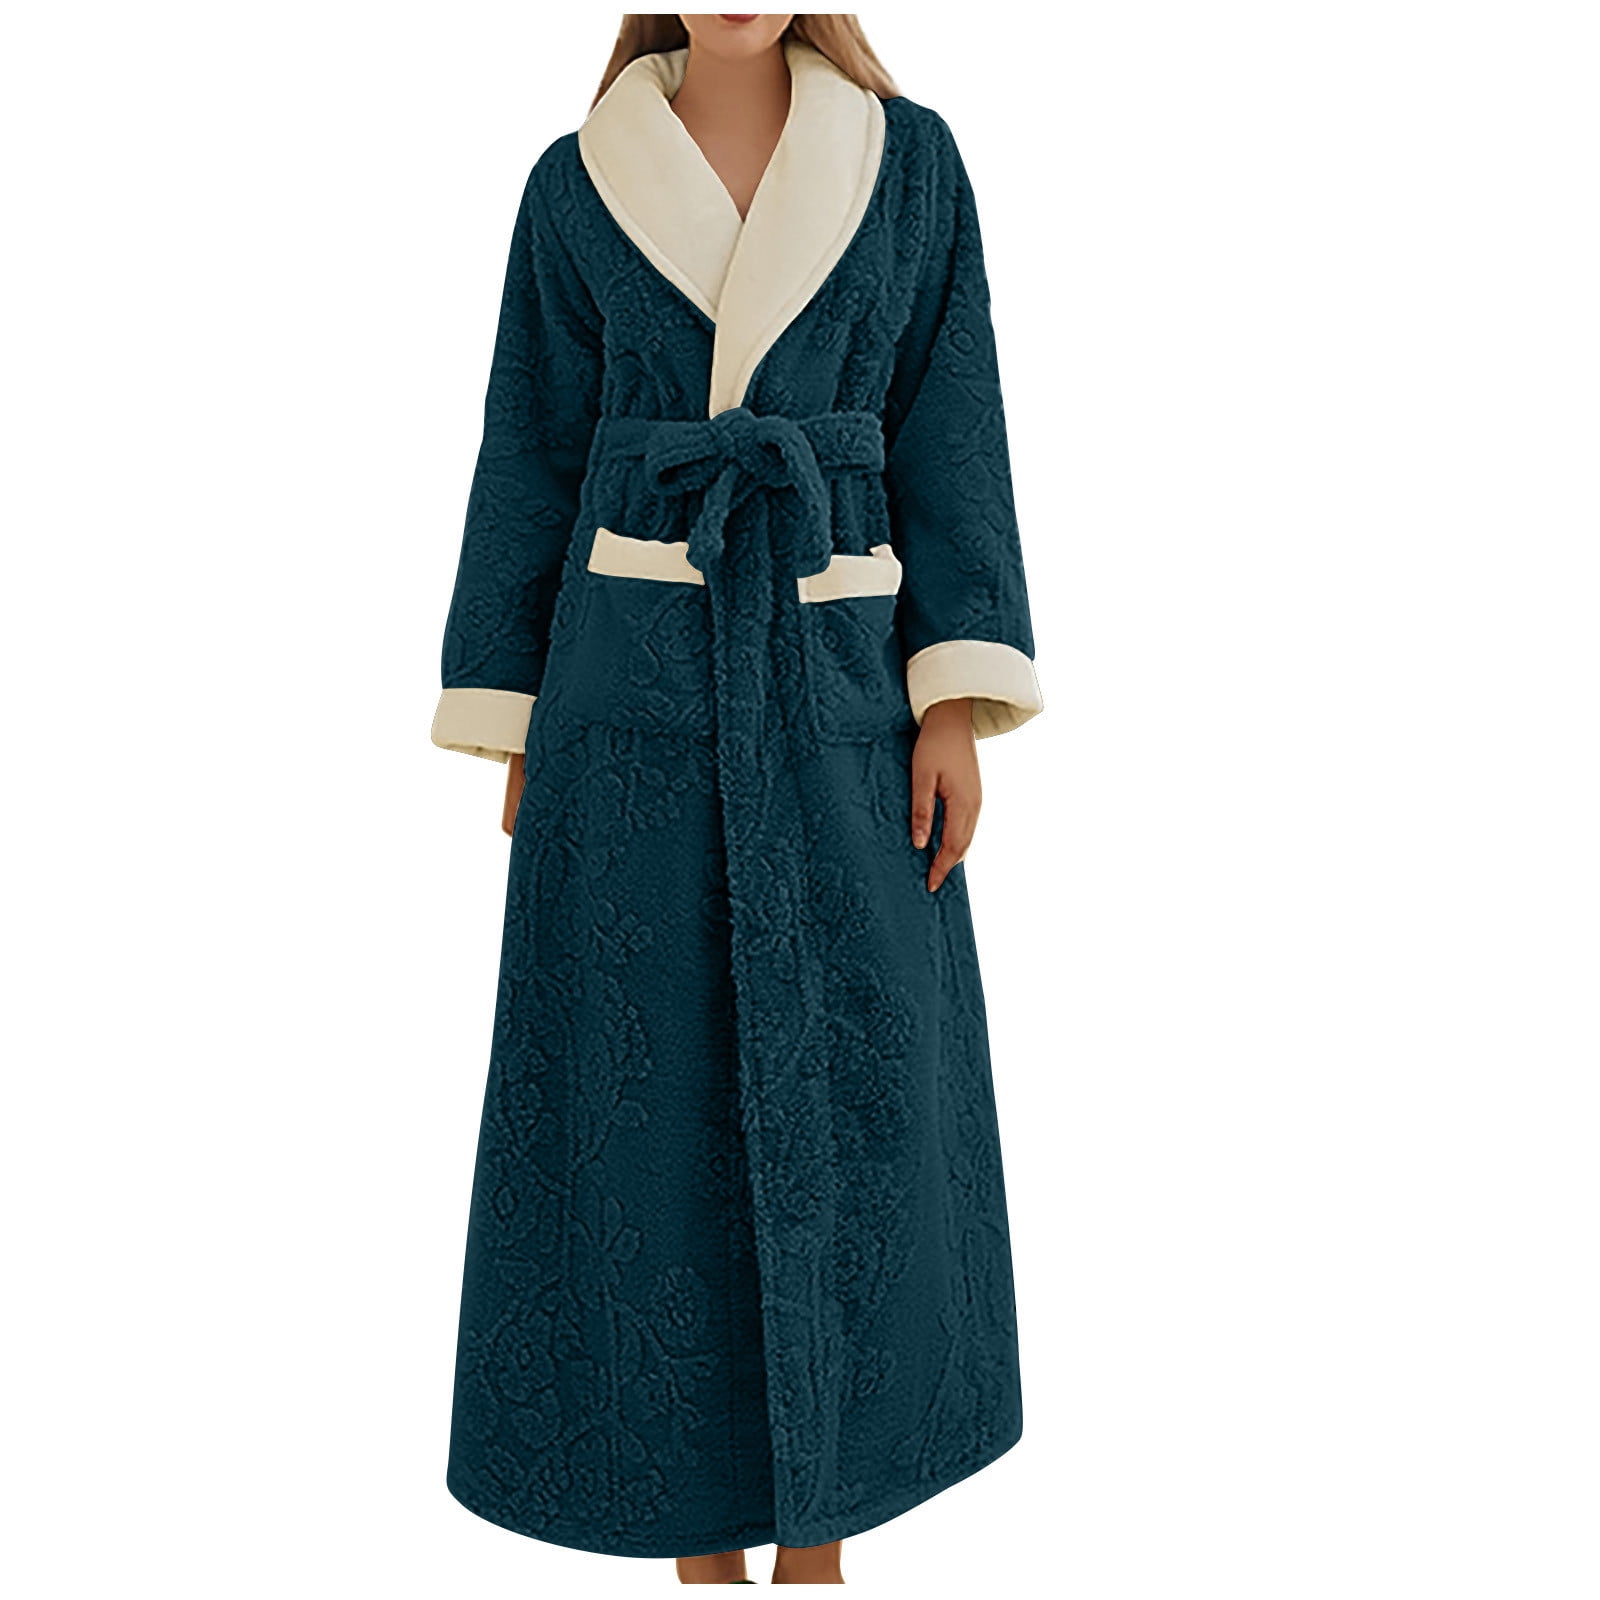 Plush Long Hooded Robe for Women Flannel Fleece Thick Full Length Bathrobe  Winter Warm Pajamas Nightgown Housecoat Womens Clothes 